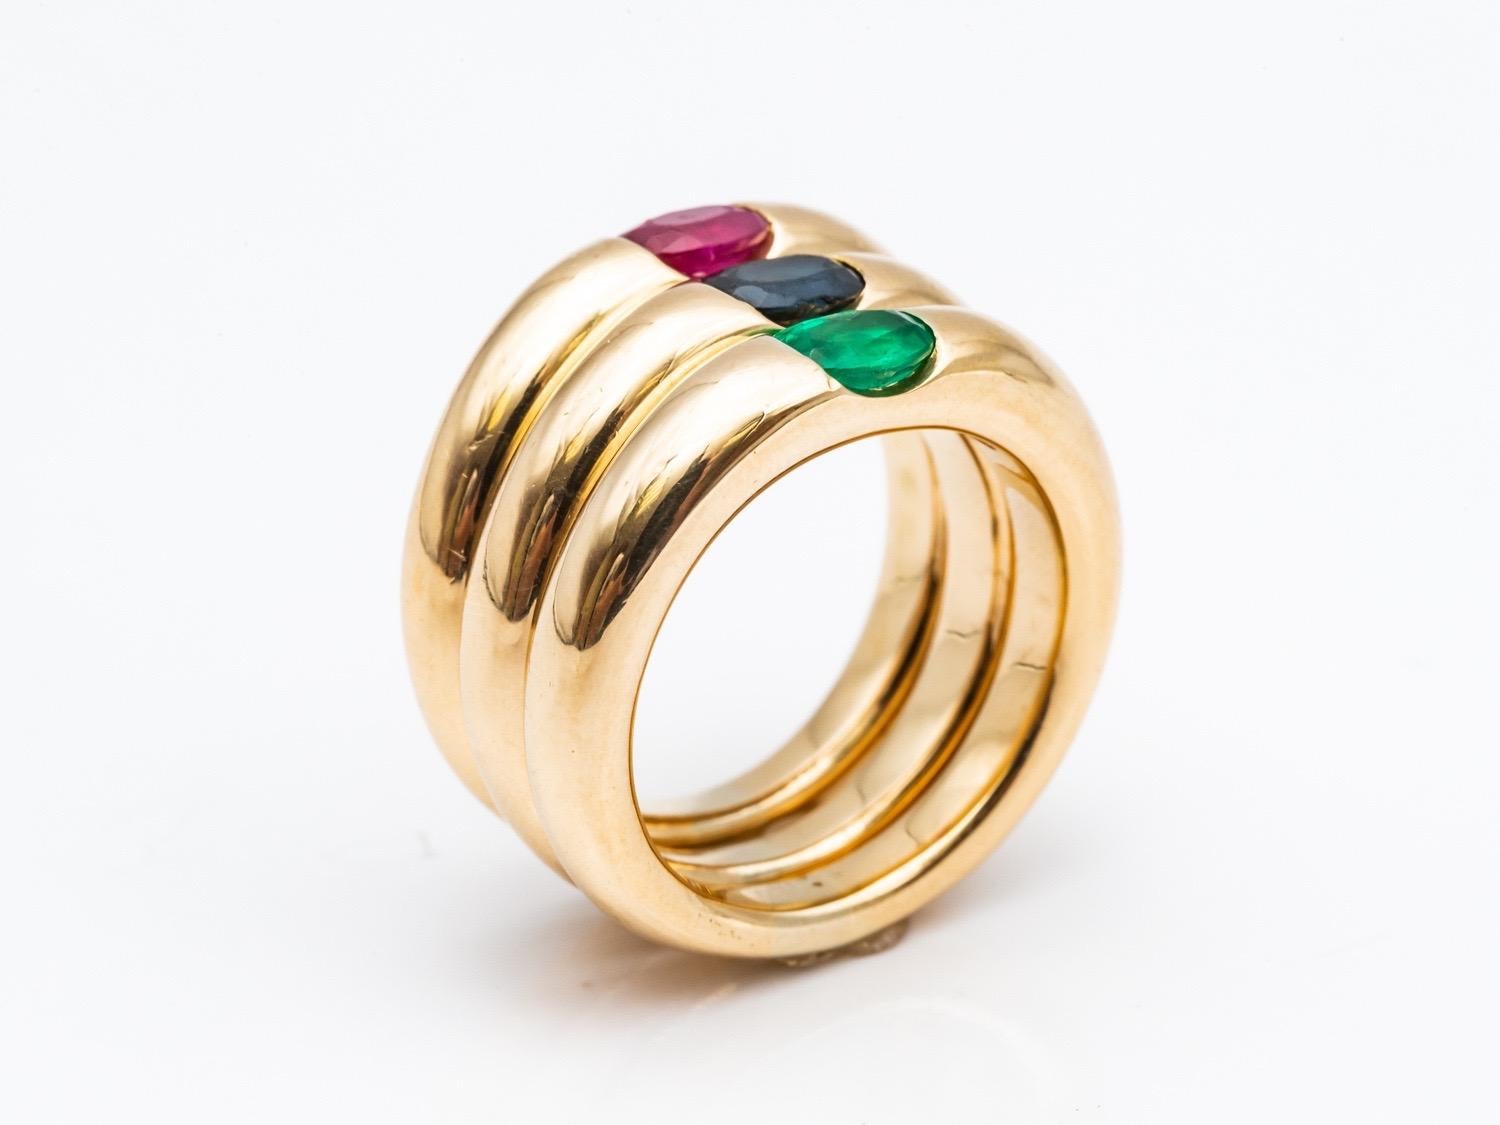 Three 18 Karat Gold Bangles Rings Set with an Emerald, a Sapphire, and a Ruby 9